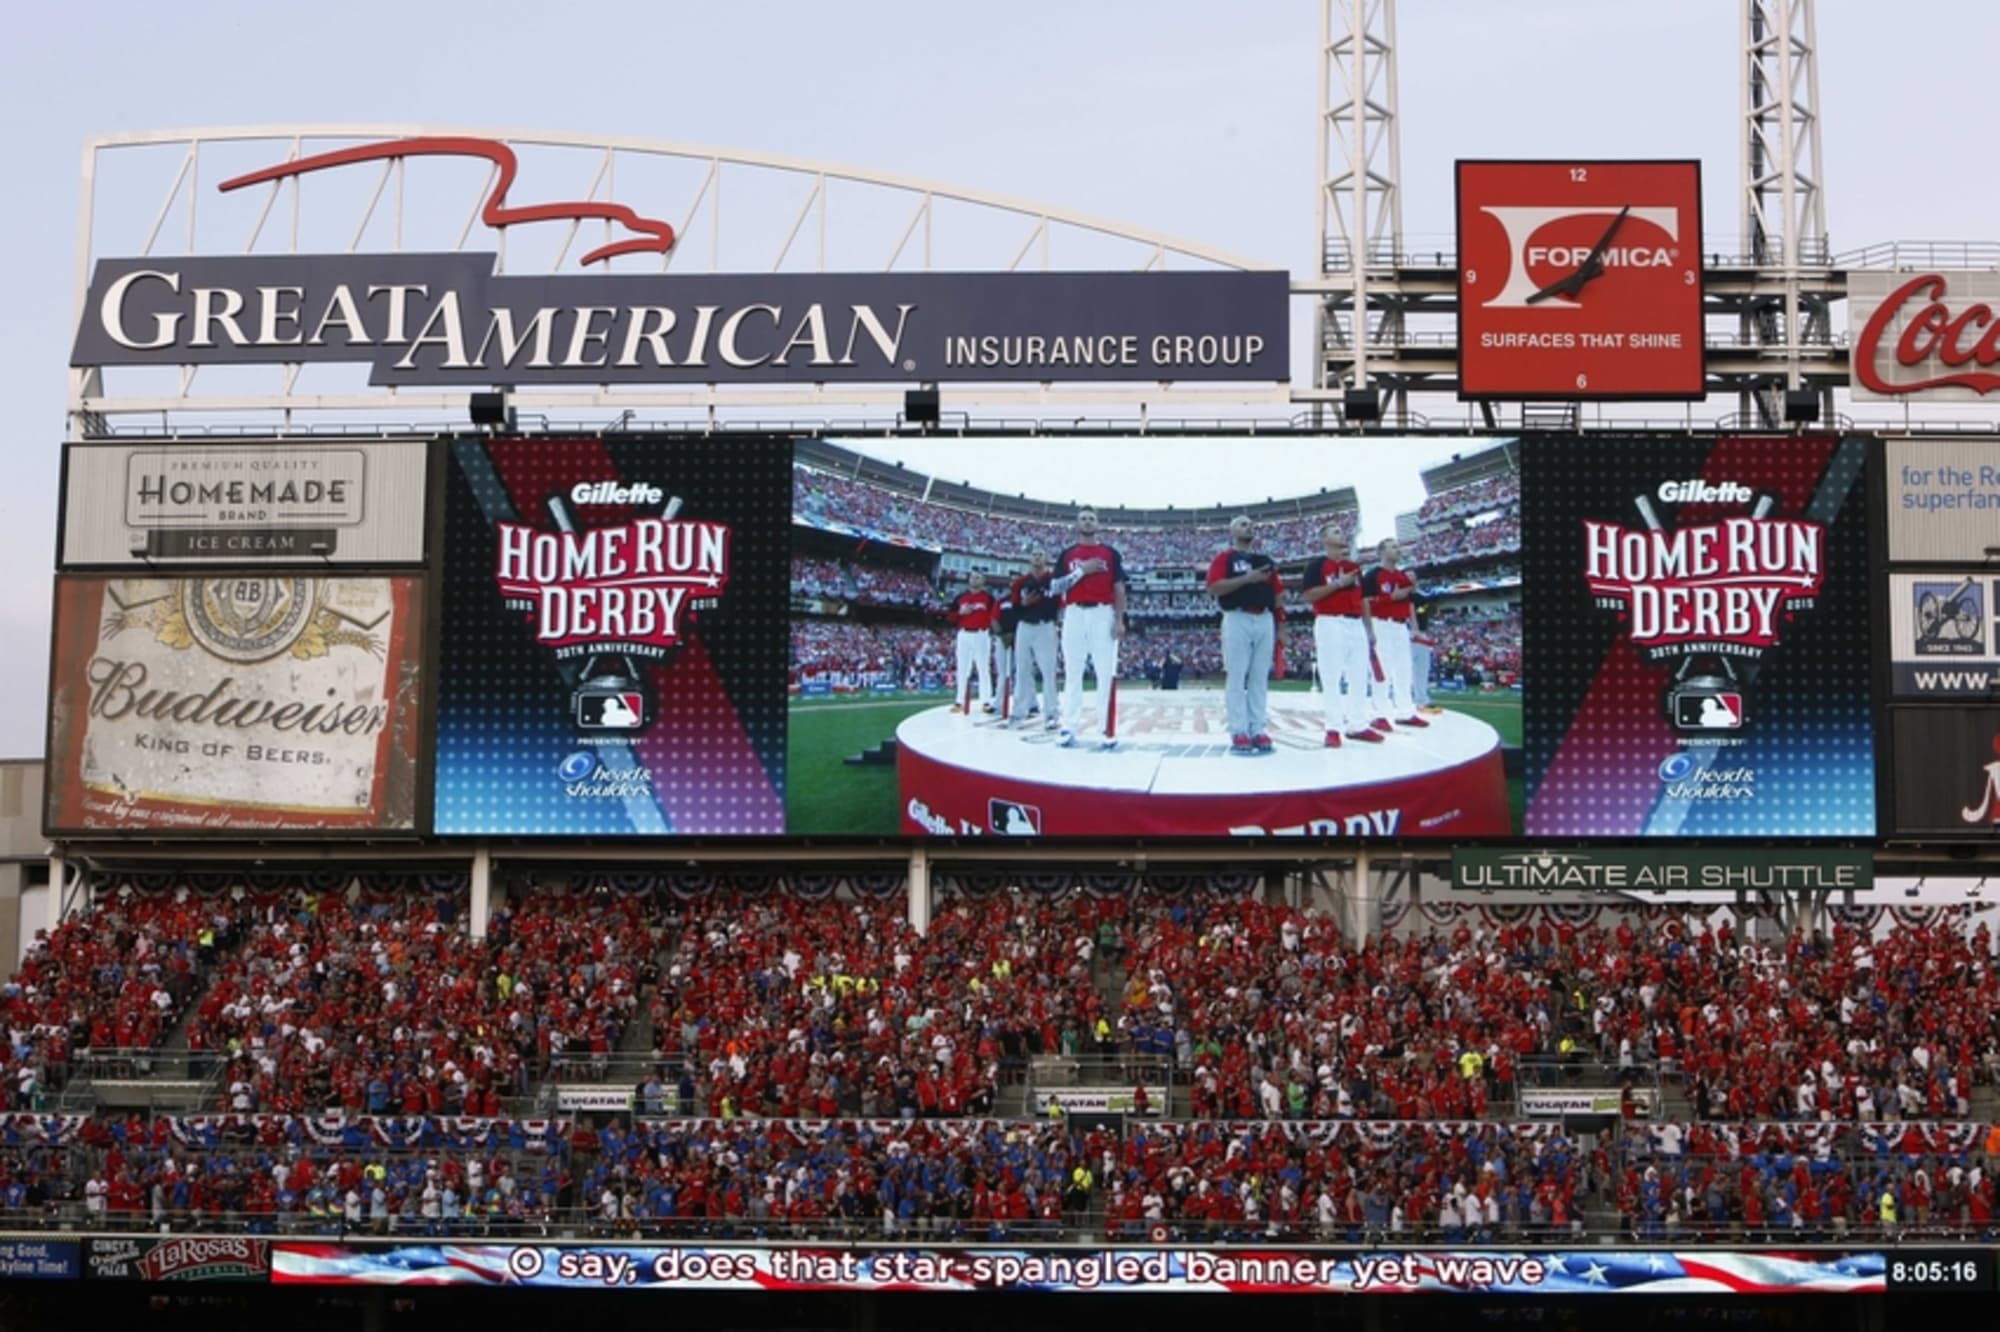 Cincinnati Reds: New scoreboard at Great American Ball Park up for vote